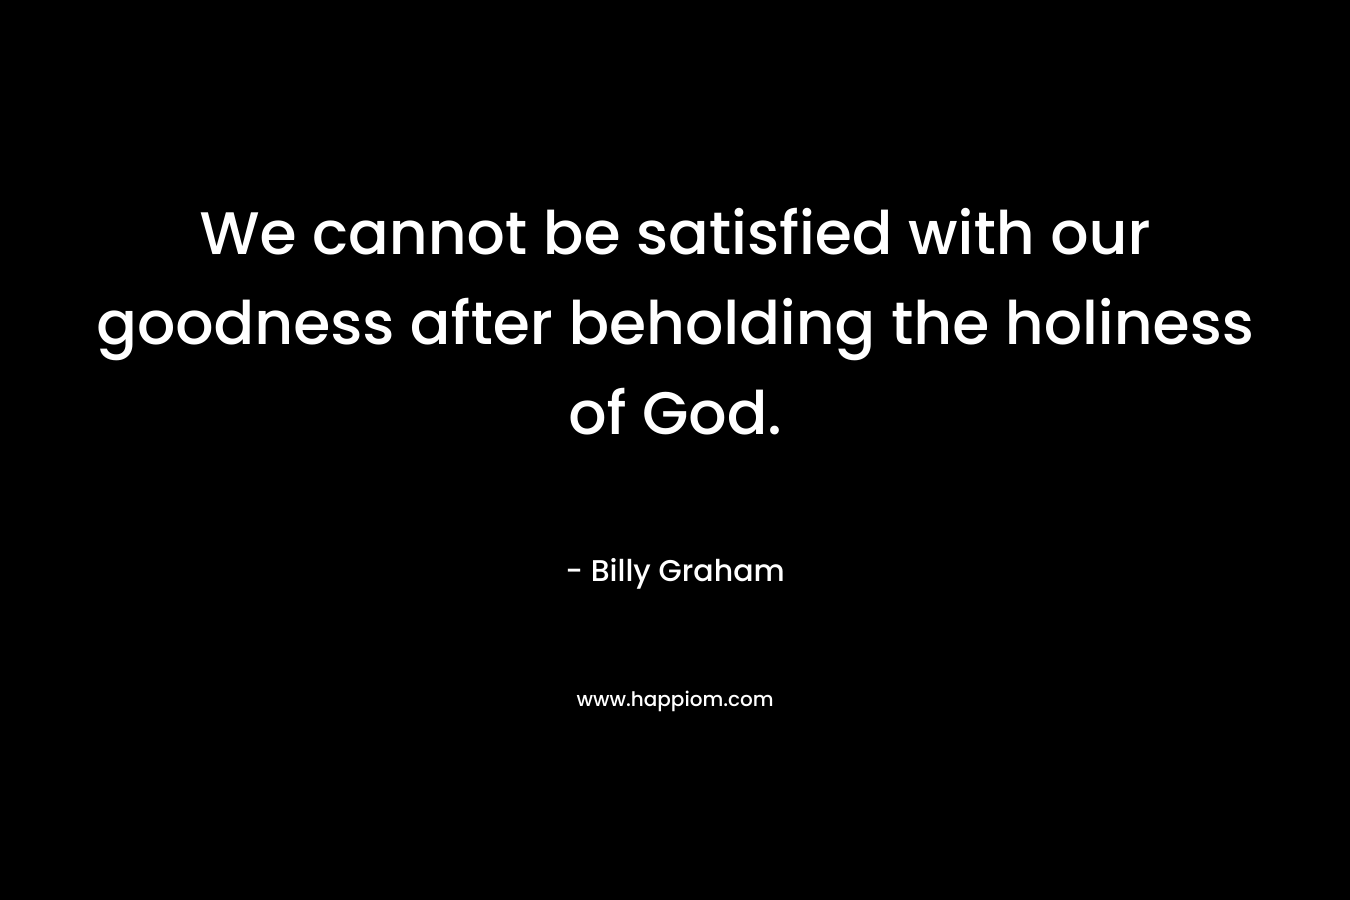 We cannot be satisfied with our goodness after beholding the holiness of God. – Billy Graham